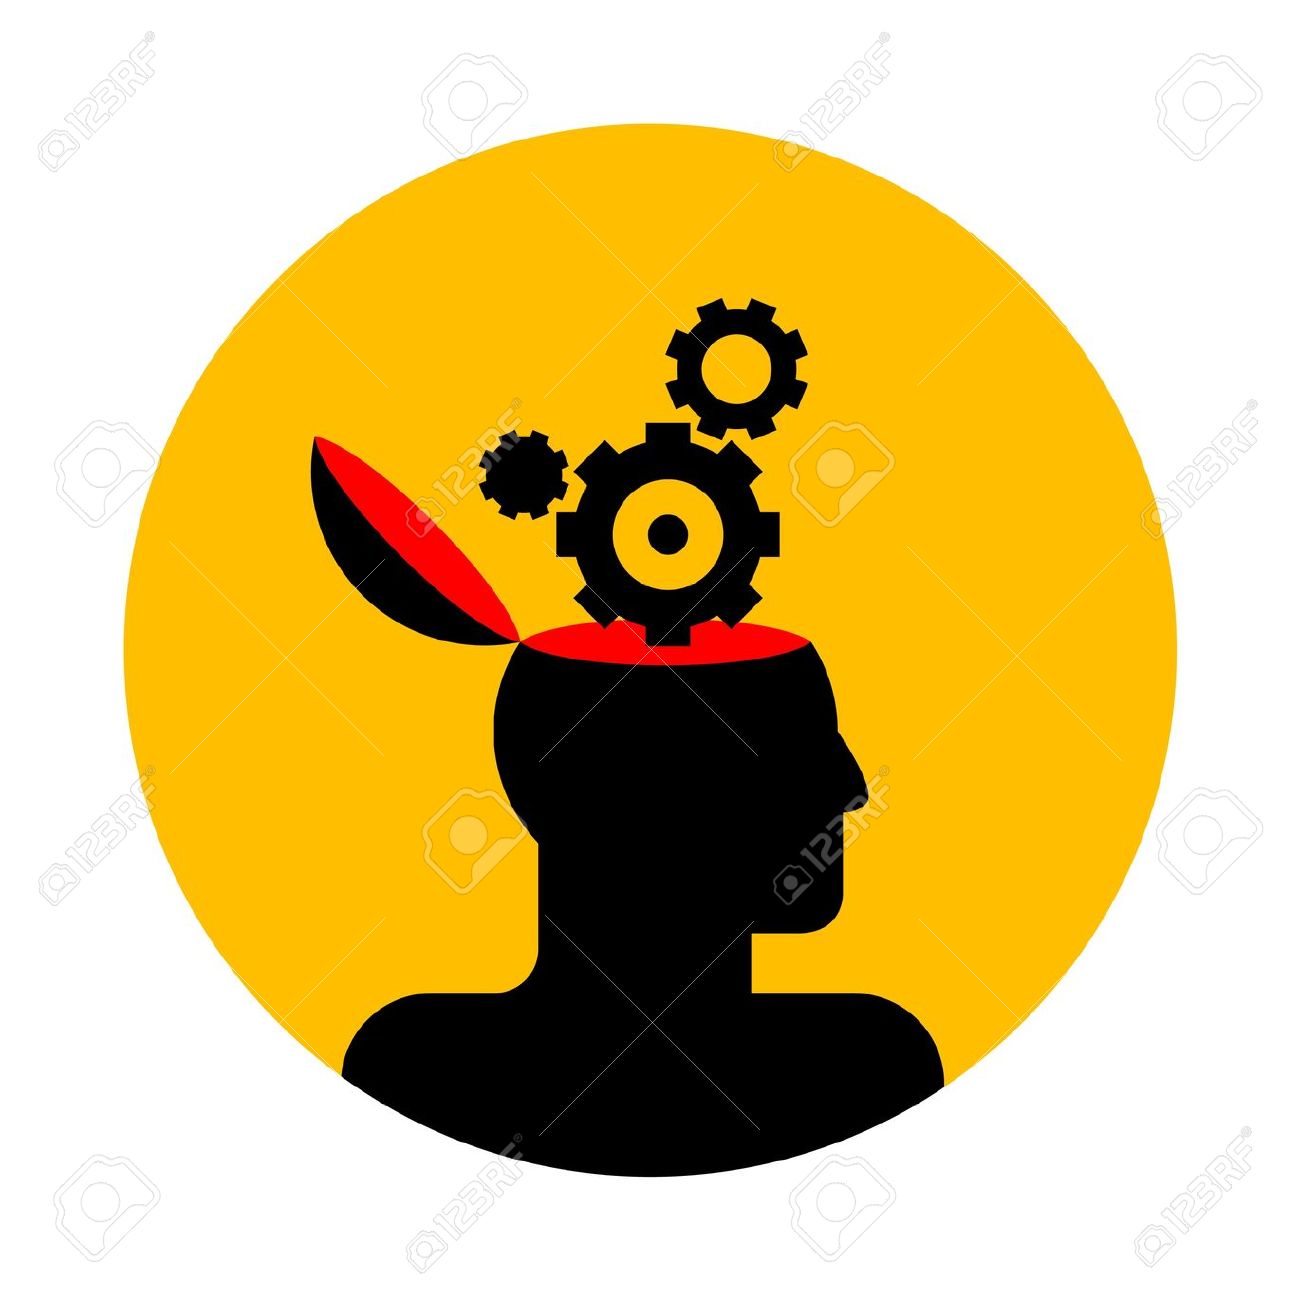 Intelligence clipart - Clipground